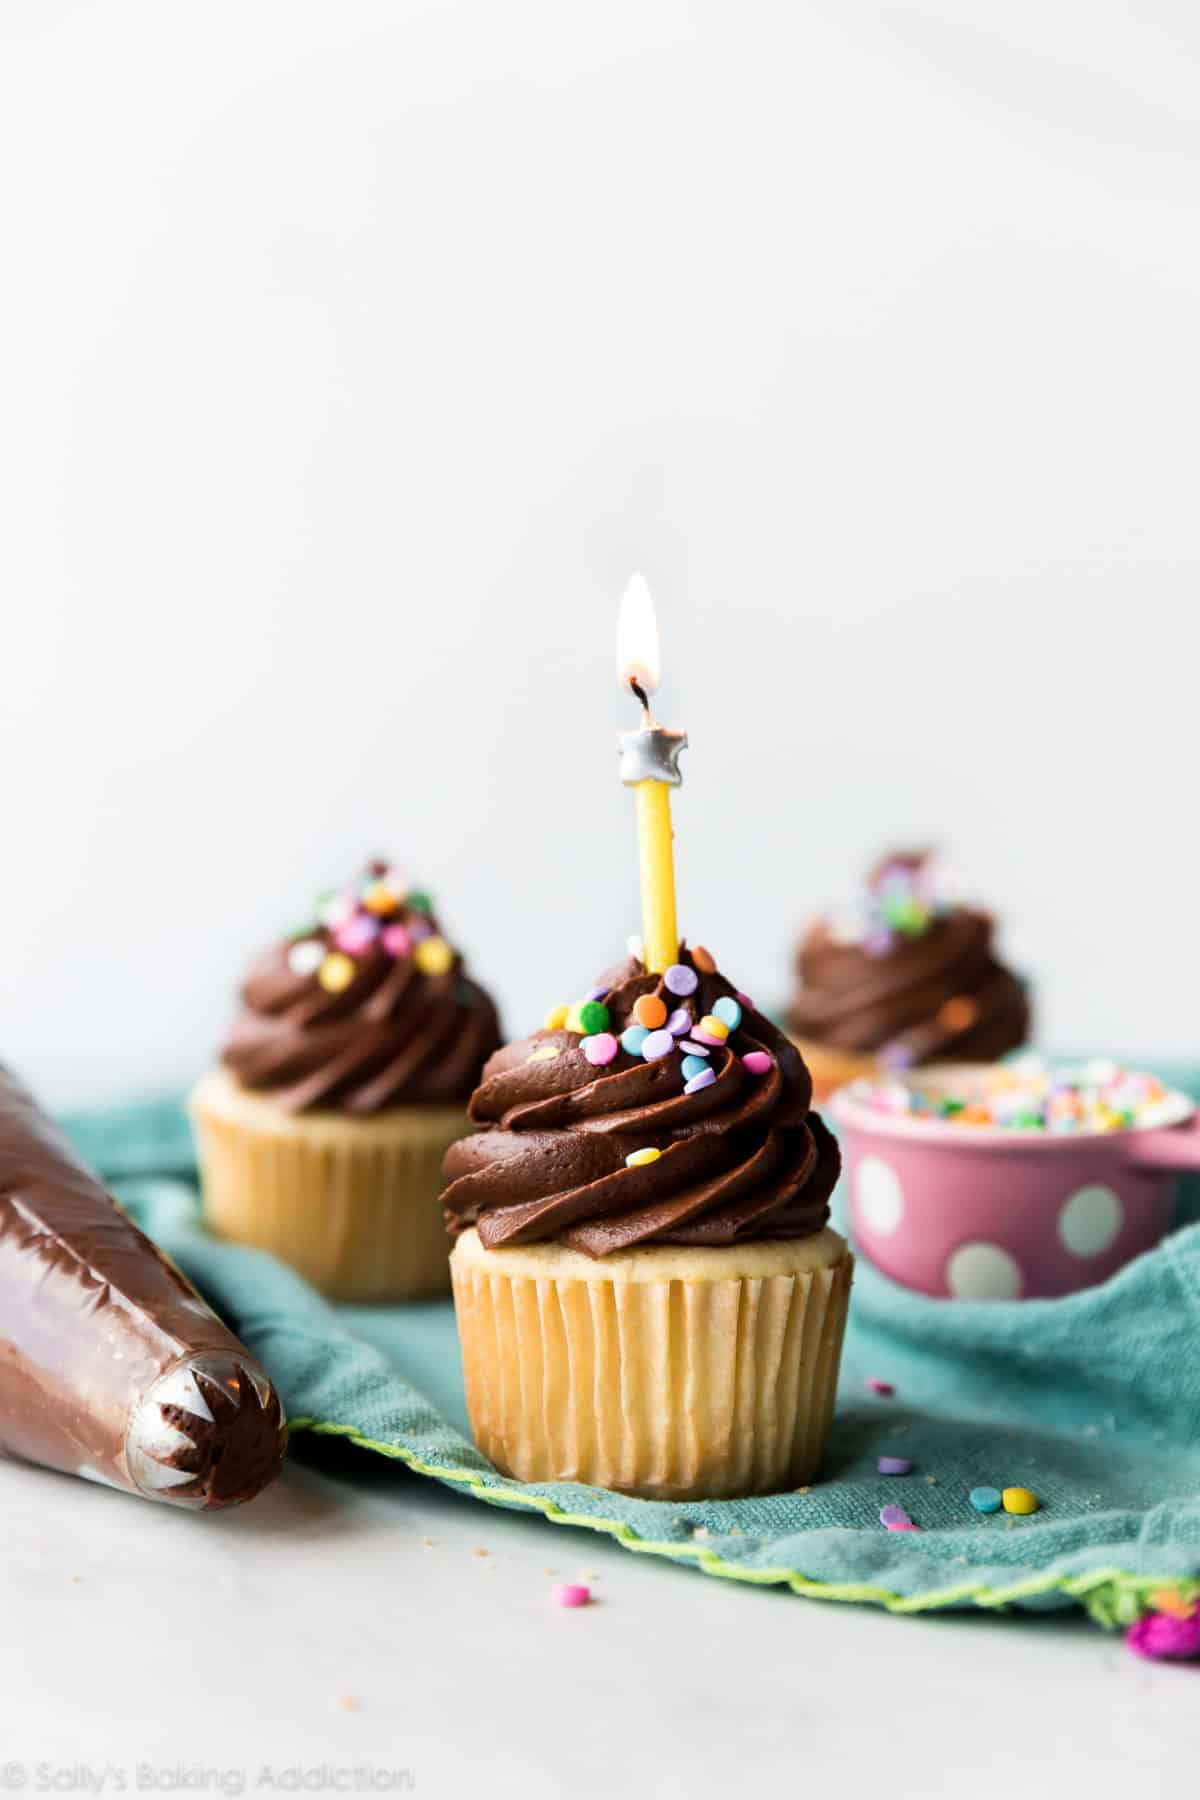 Yellow cupcakes with chocolate frosting and birthday candle